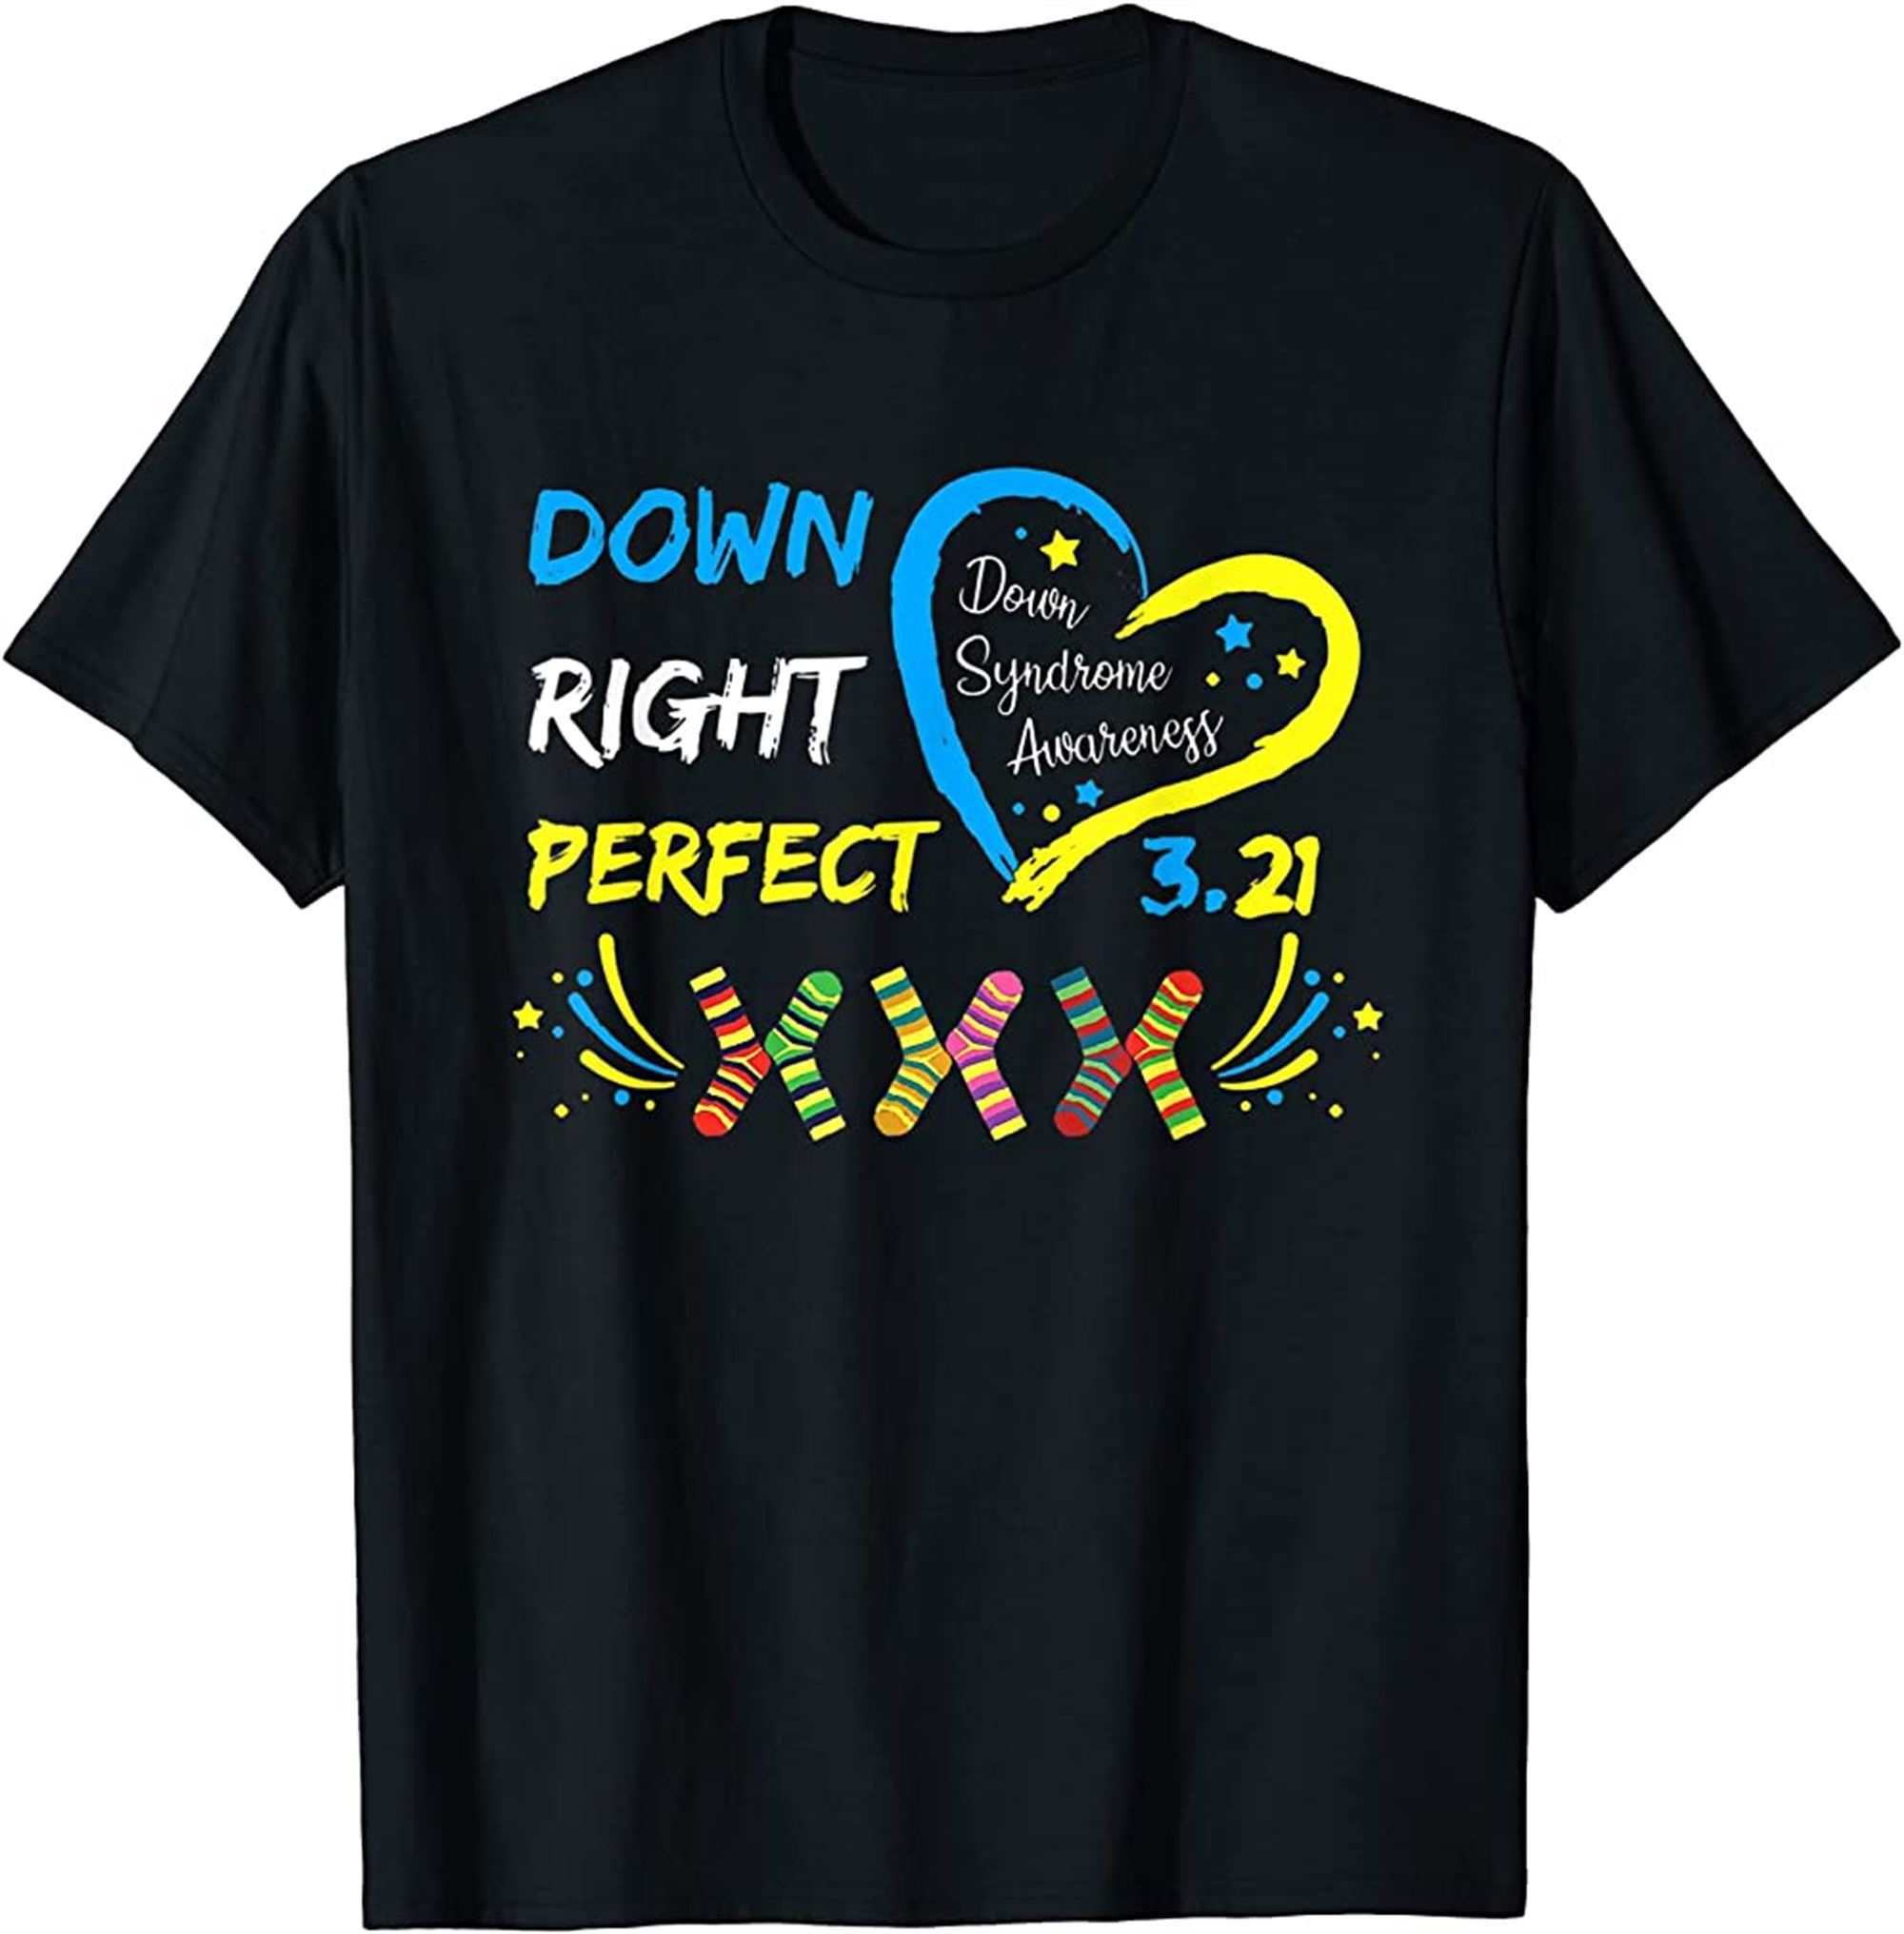 World Down Syndrome Day Awareness Socks T Shirt 21 March T-shirt Plus Size Up To 5xl